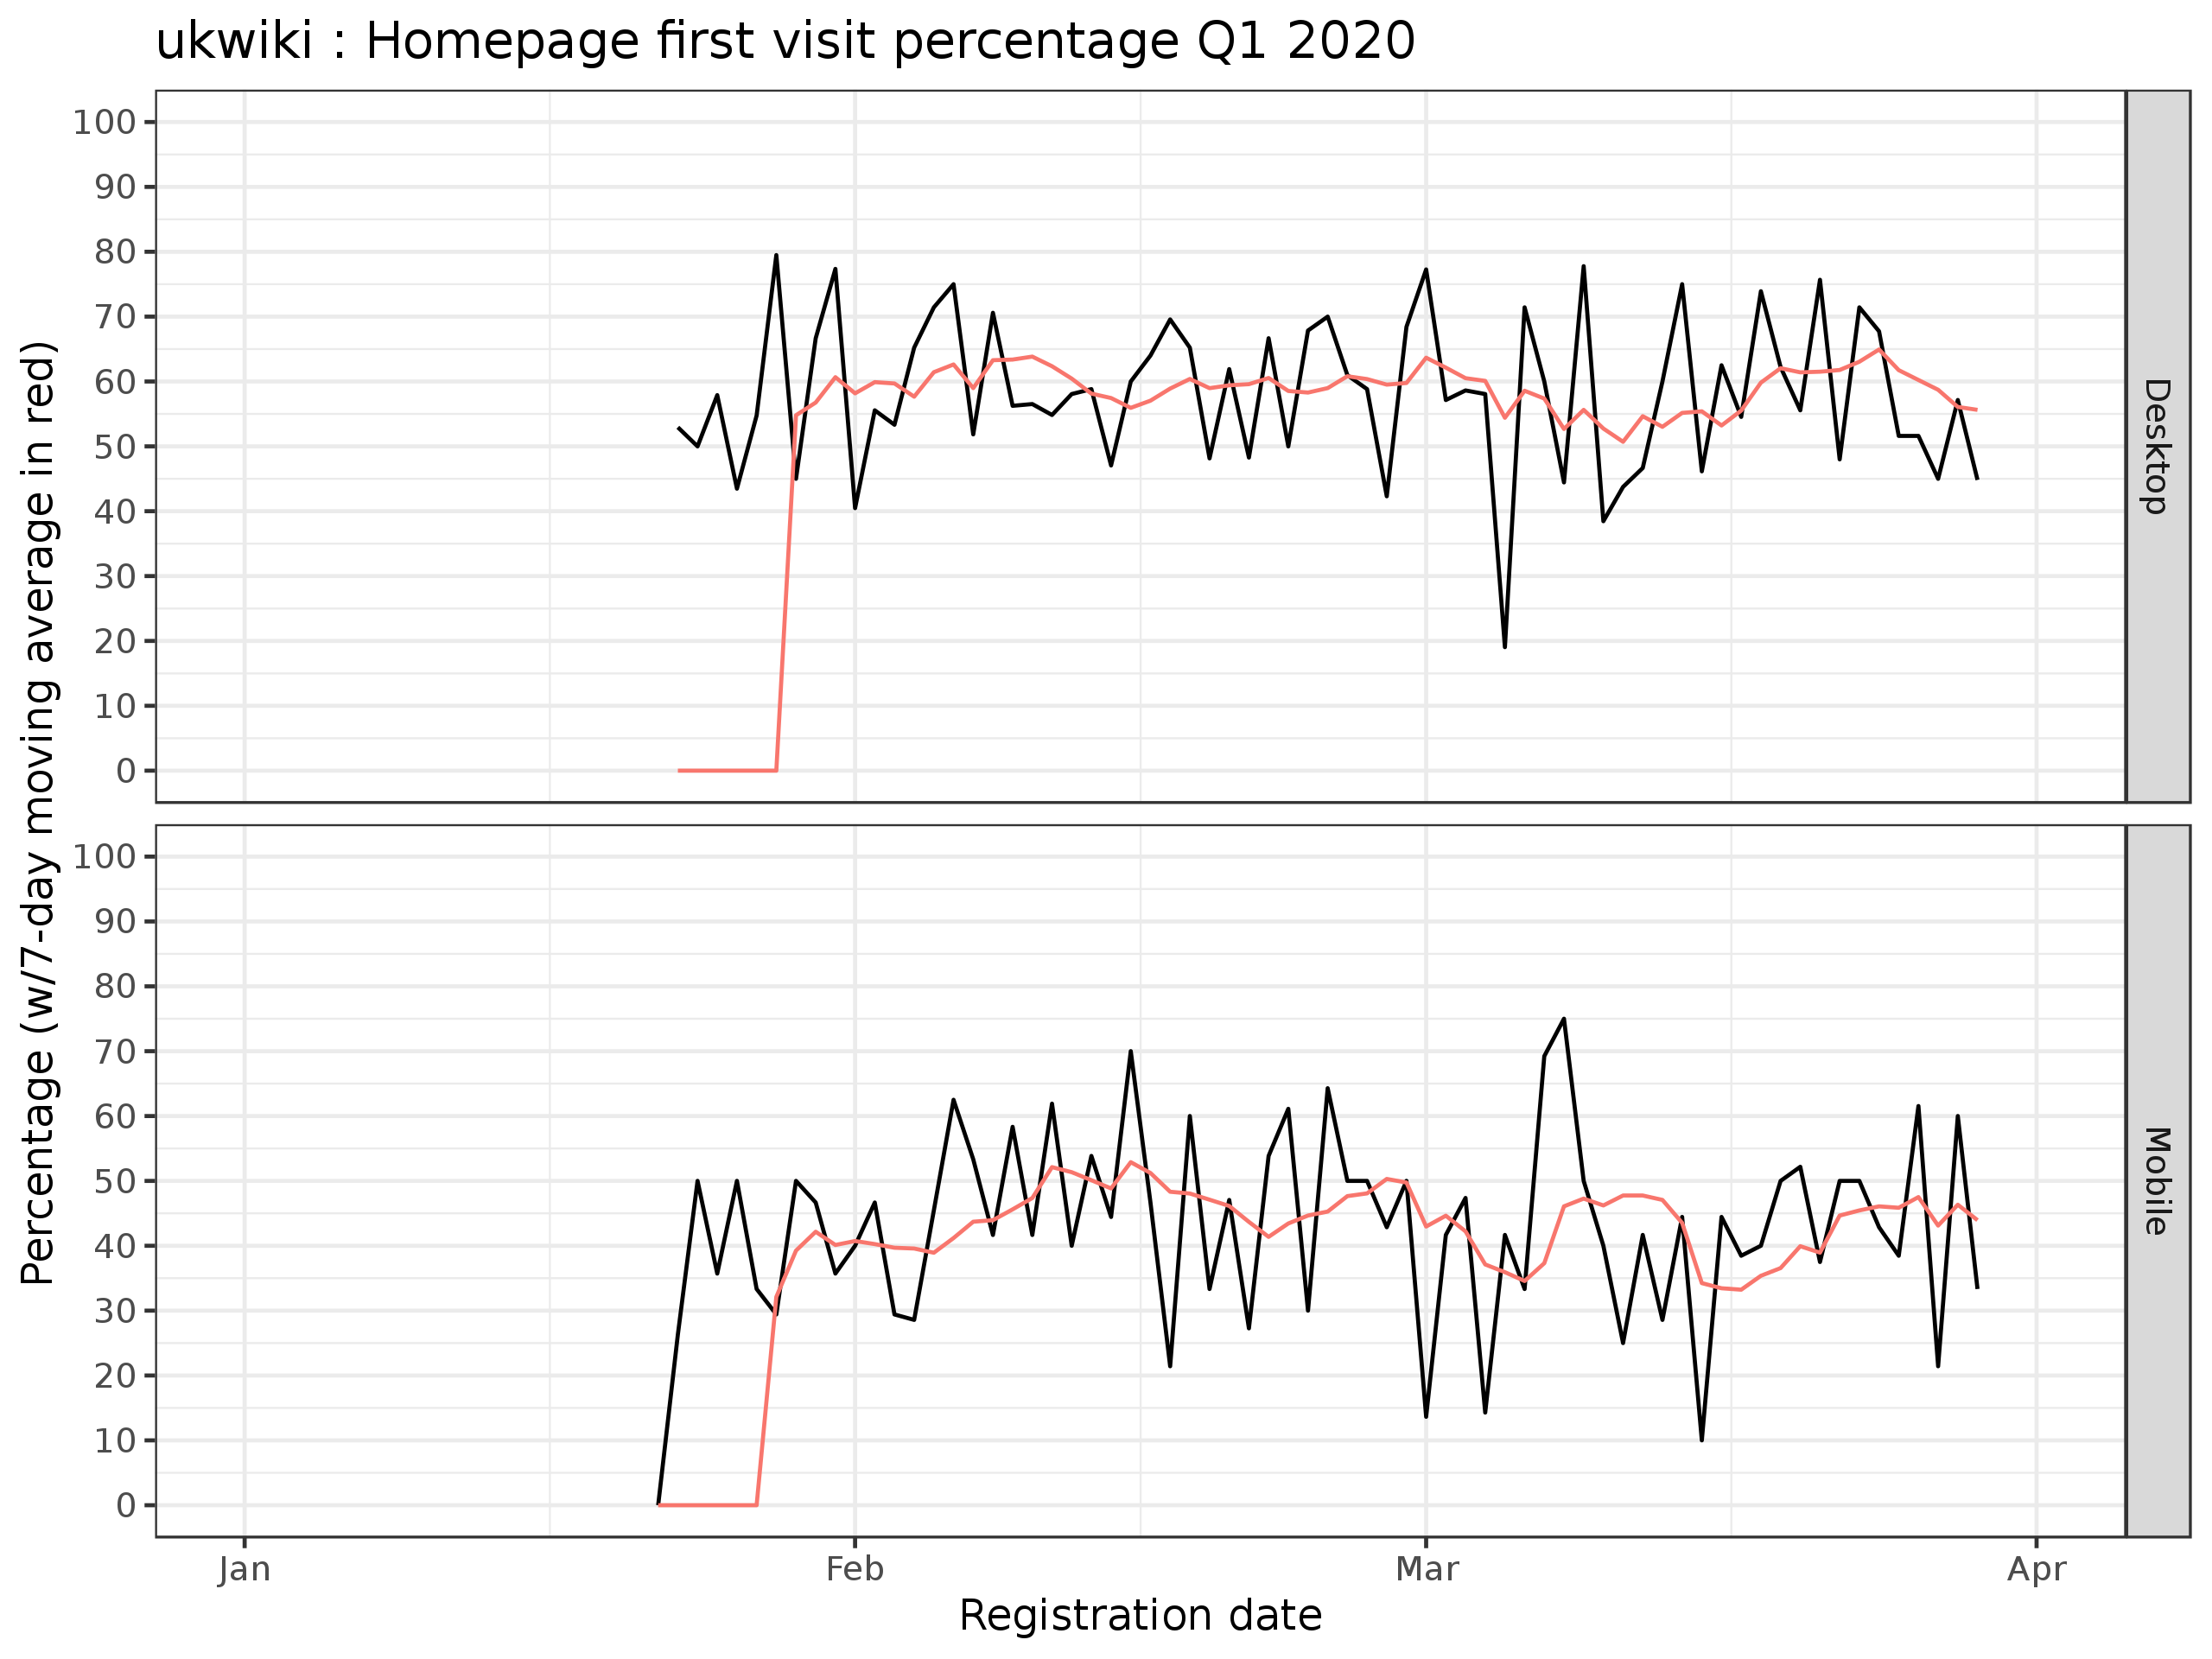 homepage_discovery_rate_Q1_2020_ukwiki.png (1×2 px, 302 KB)